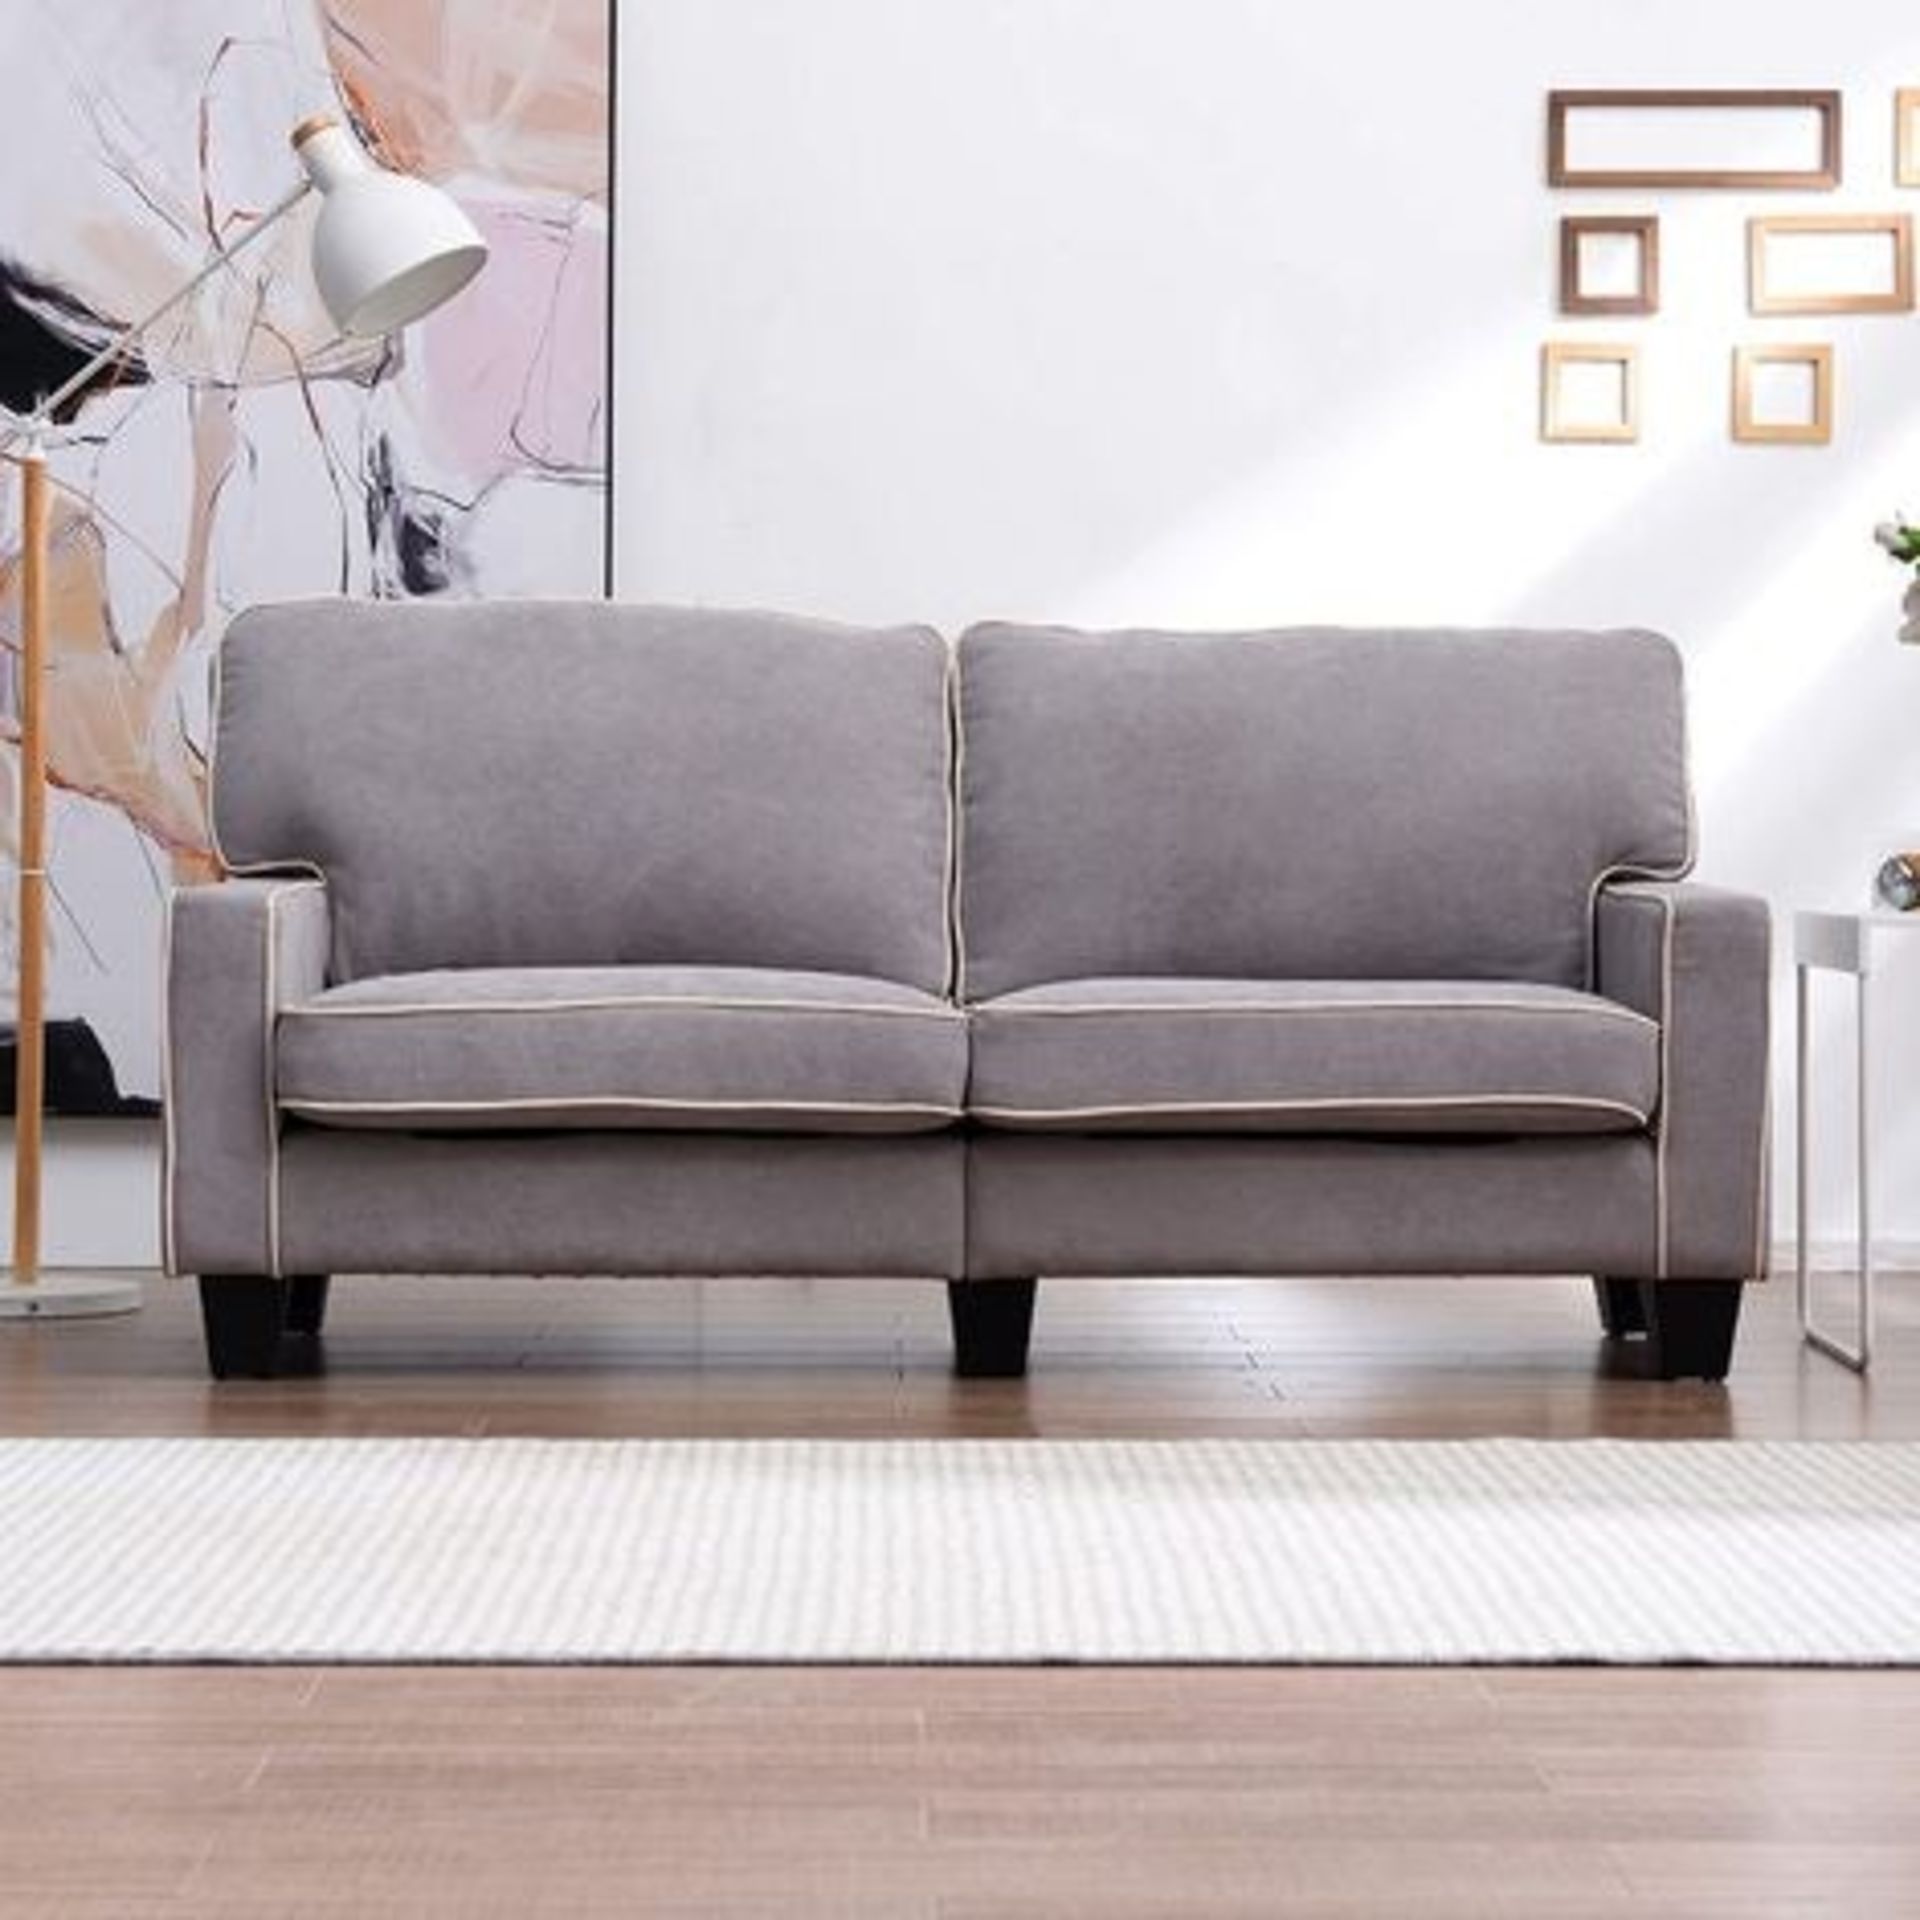 Cherry Tree Furniture Sherbrook Large 2 Seater Fabric Sofa with Contrasting Trim in Light Grey Fabri - Image 2 of 3